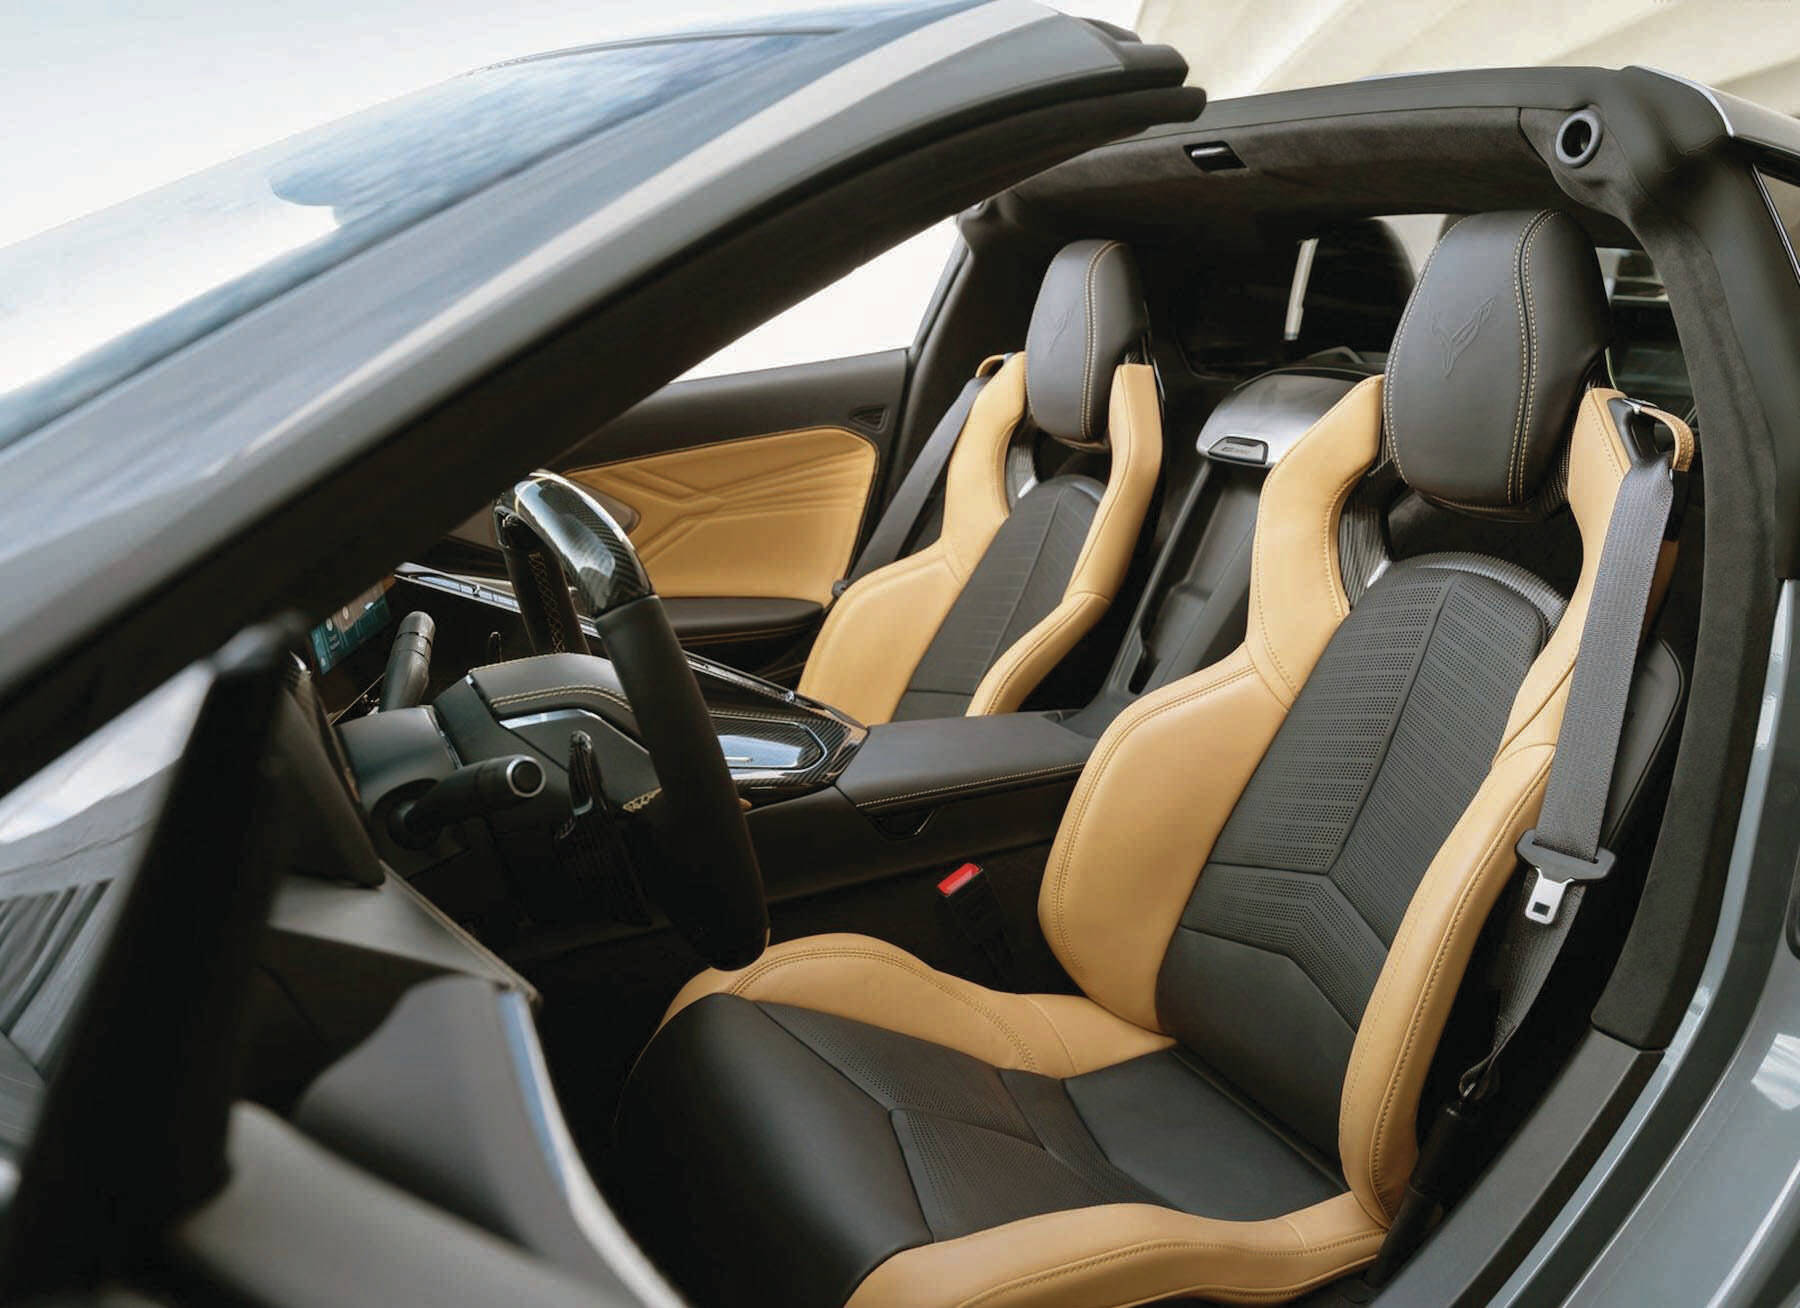 The Corvettes cockpit, although roomy enough, is much narrower than the width of the vehicle implies. Although the base E-Ray rings it at about $128,800, buyers can expect to pay much more for higher trim levels. PHOTO: CHEVROLET